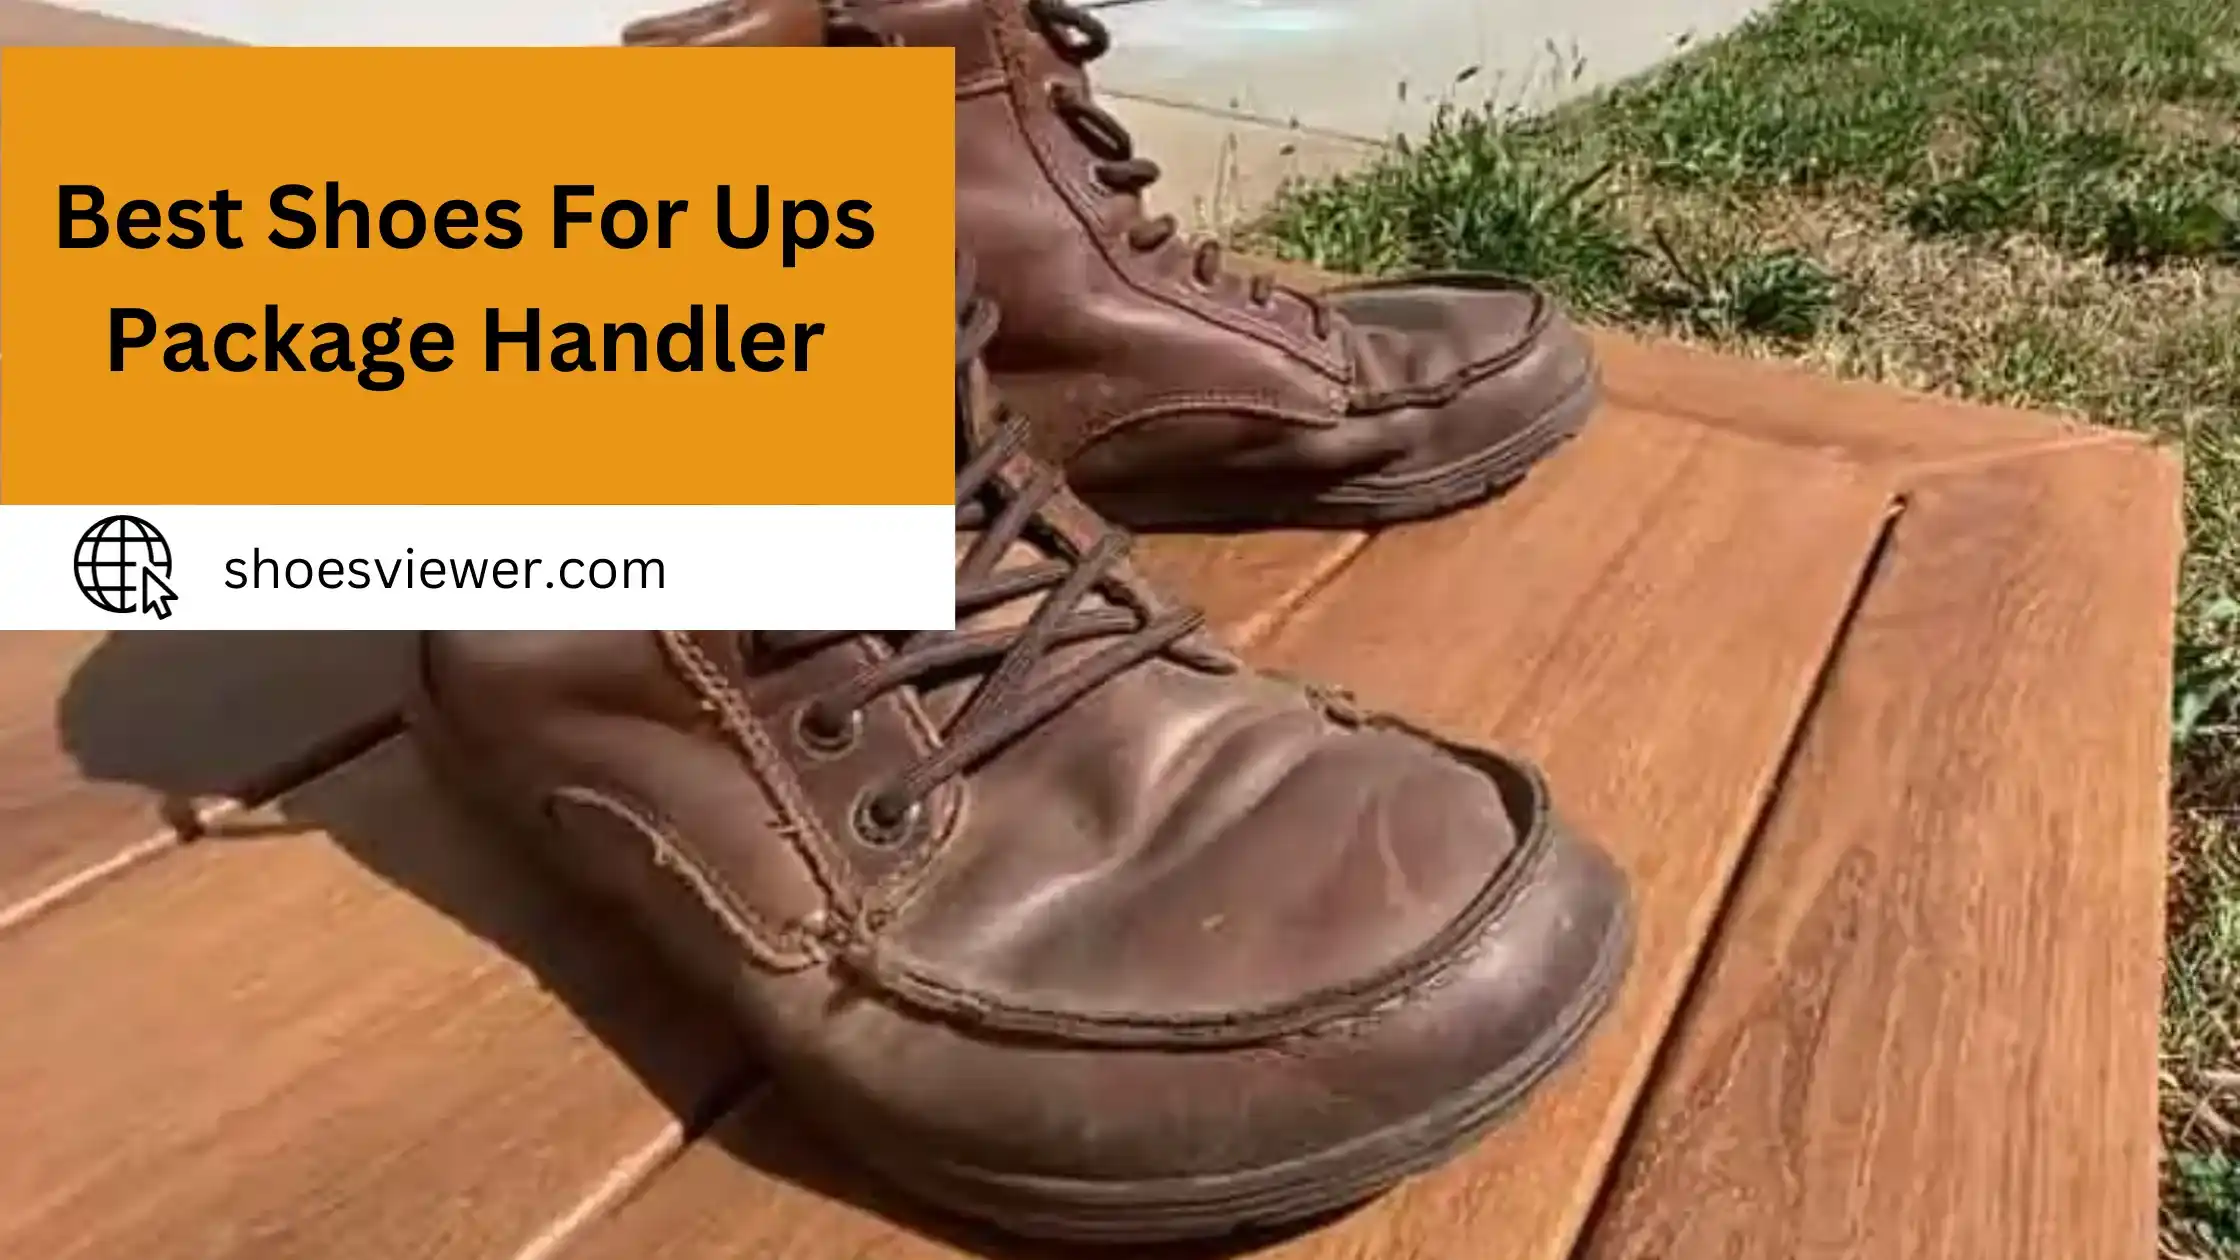 Best Shoes For Ups Package Handler - A Comprehensive Guide